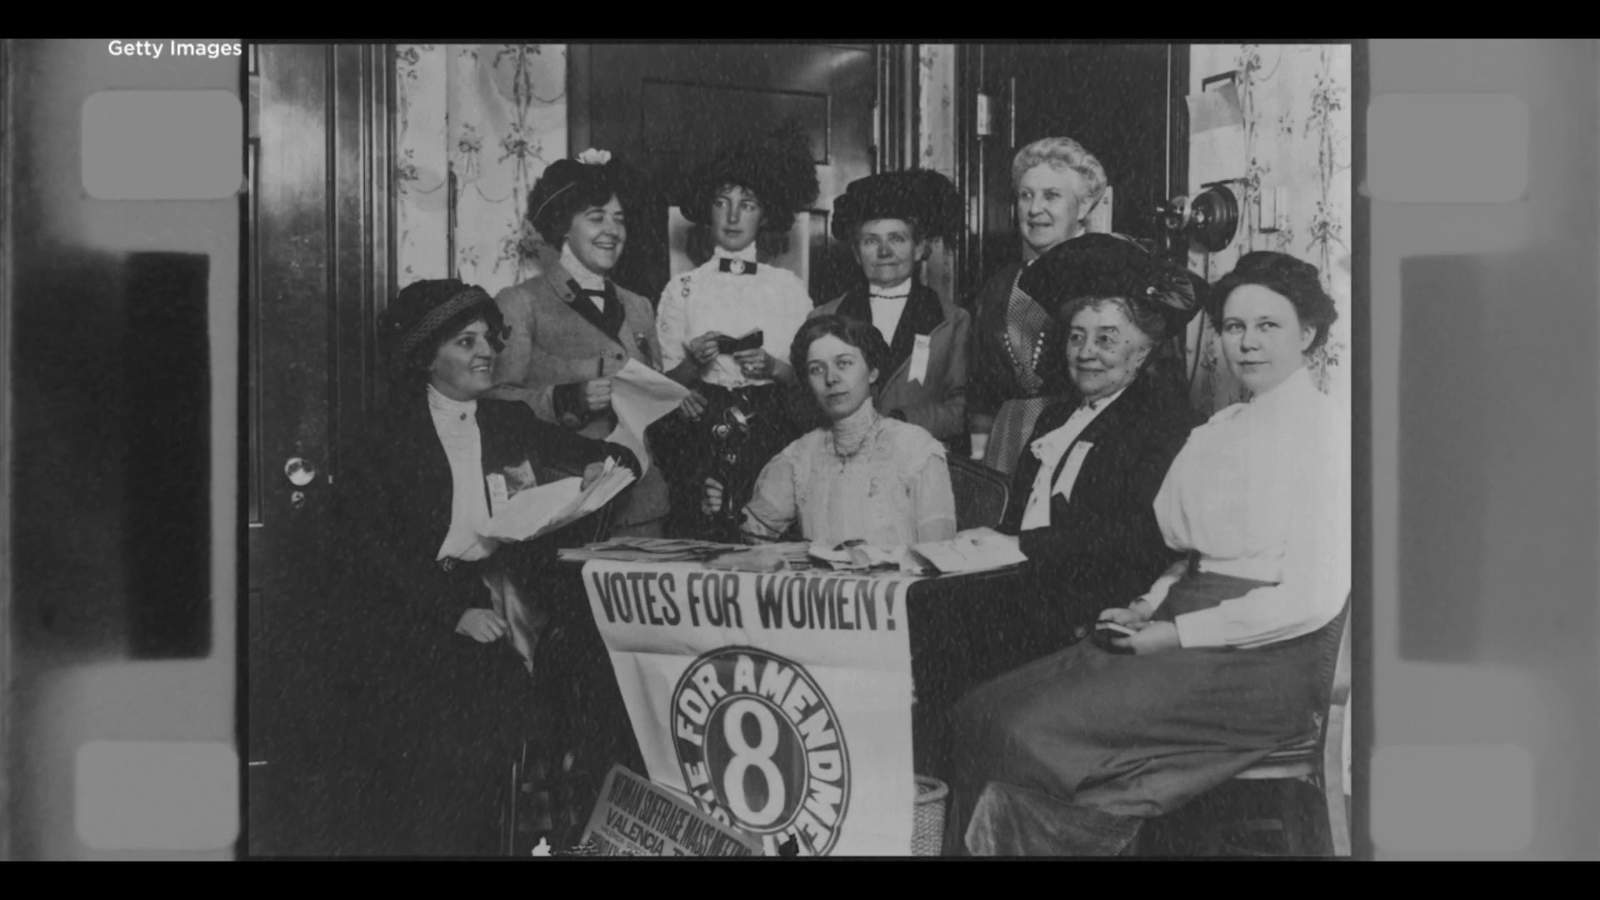 19th Amendment anniversary: A timeline of 100 years of voting rights for women